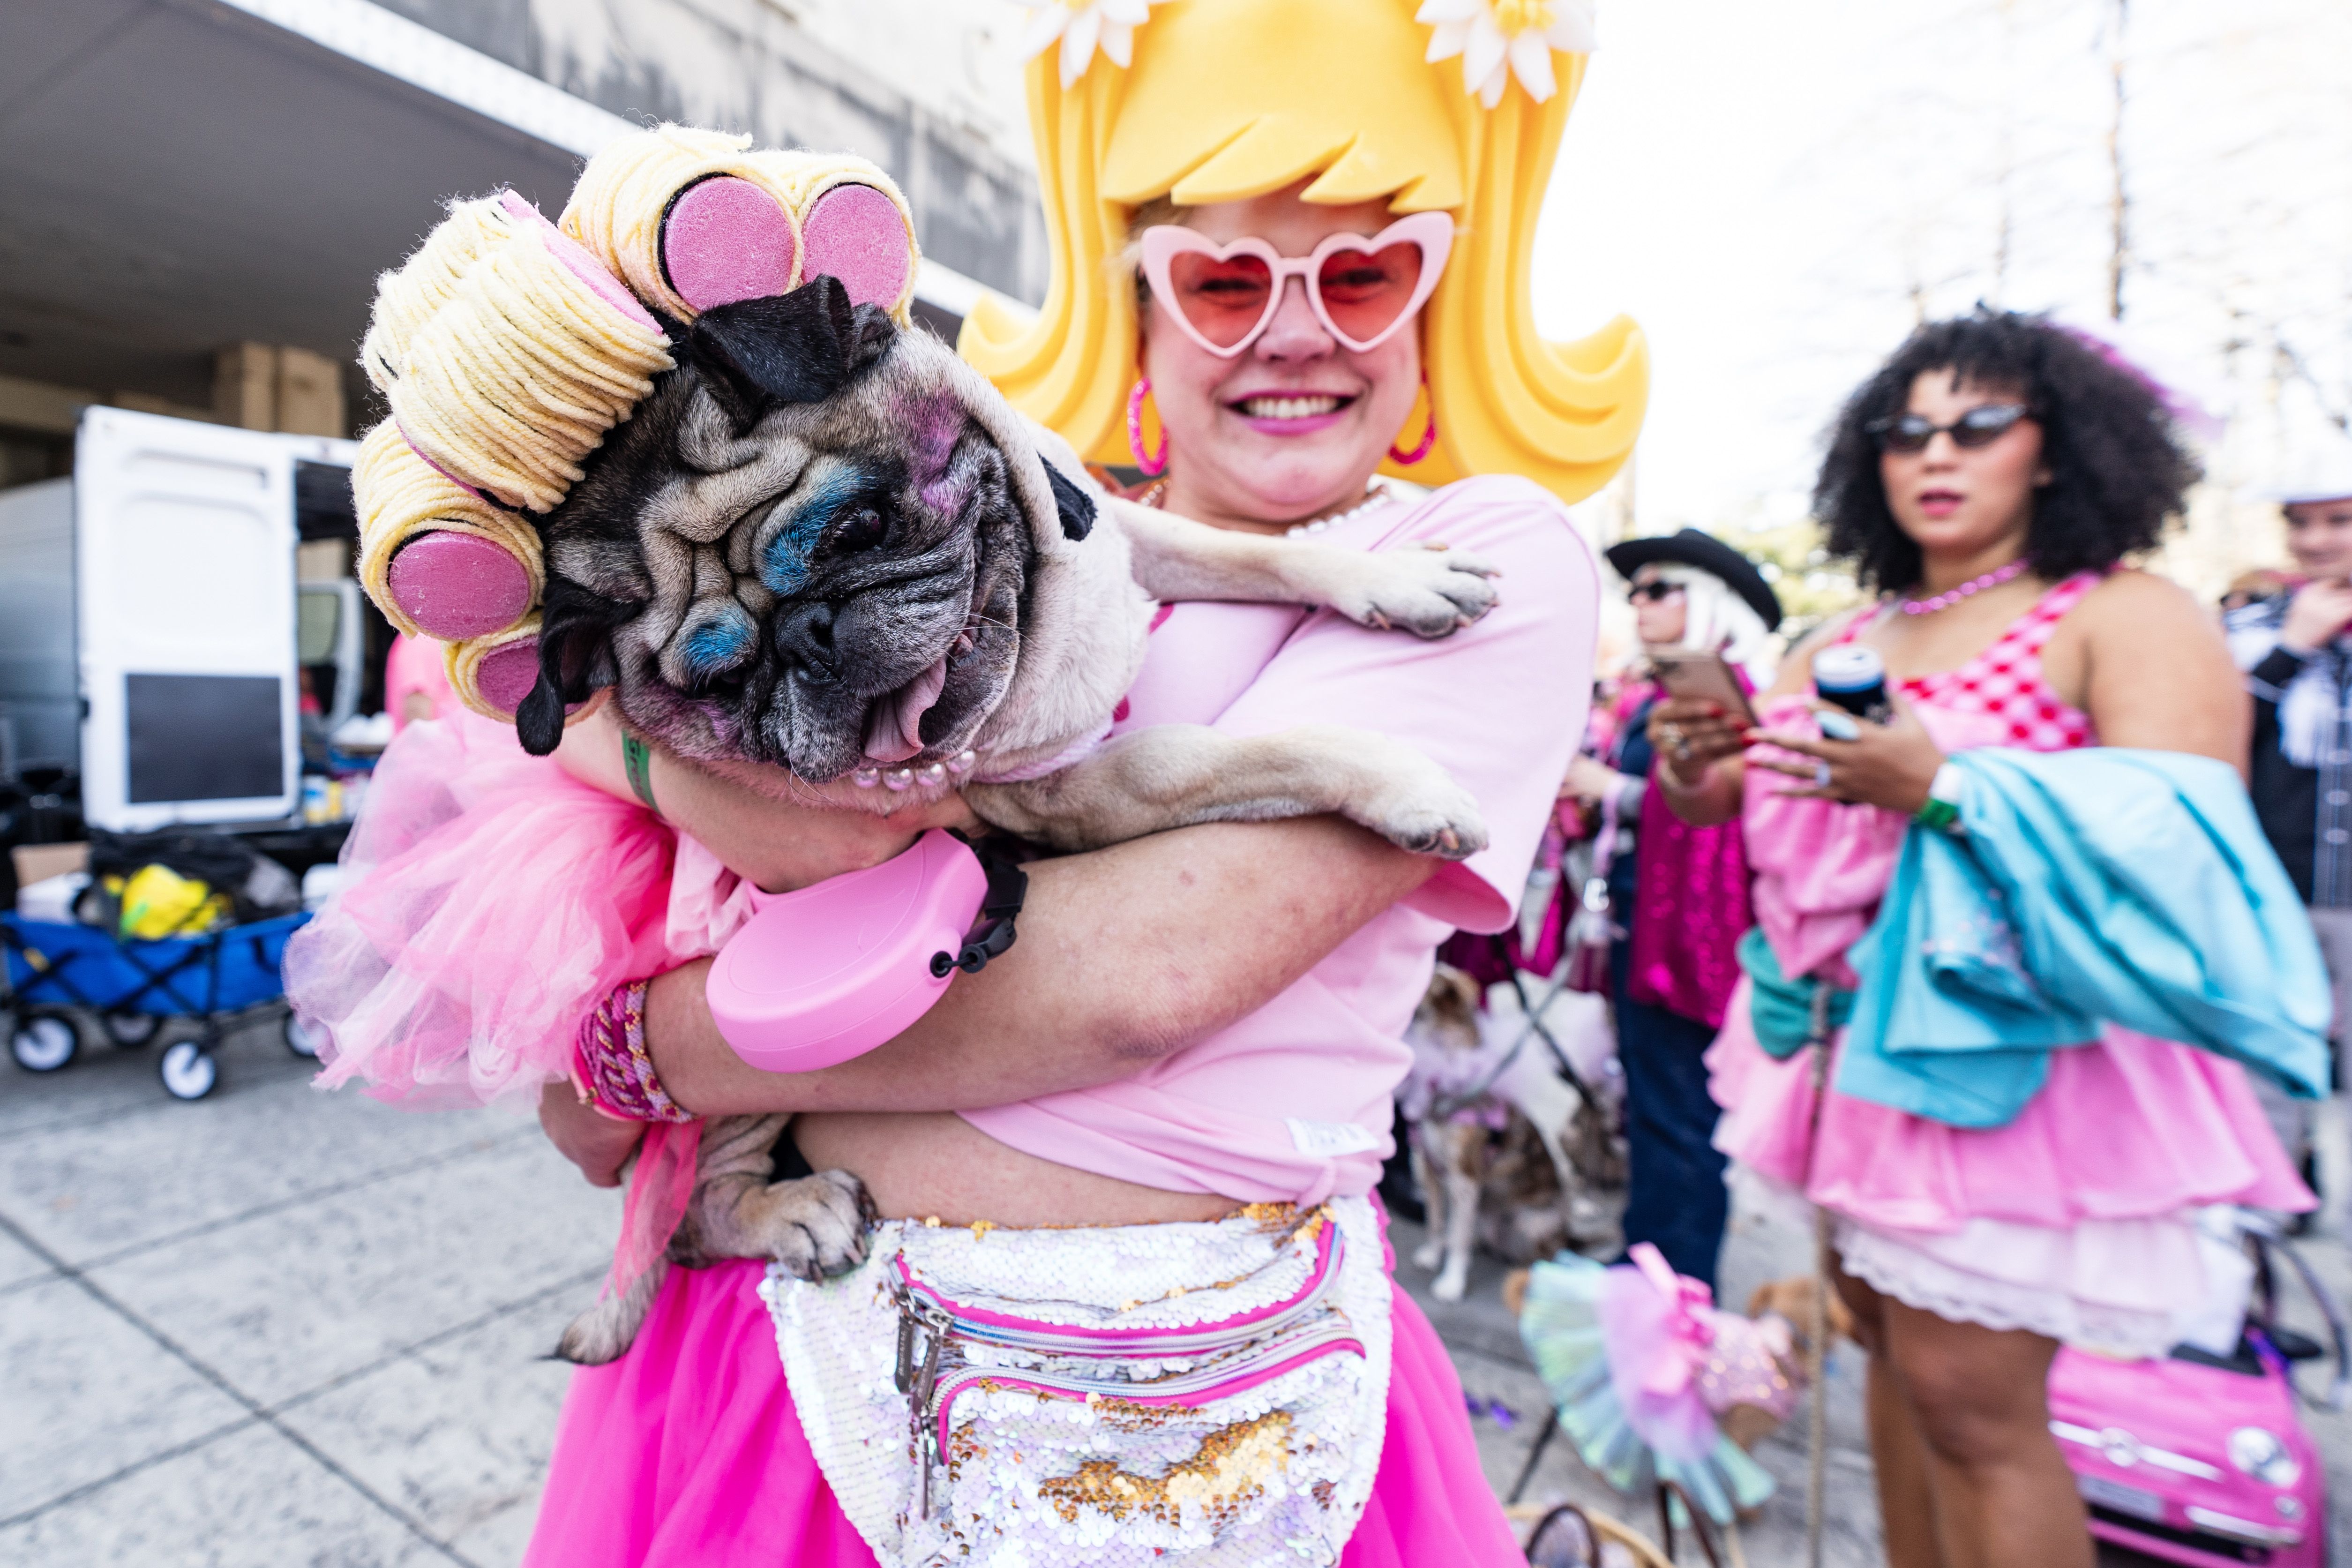 A costumed parade-goers holds a pug, wearing hair curlers.